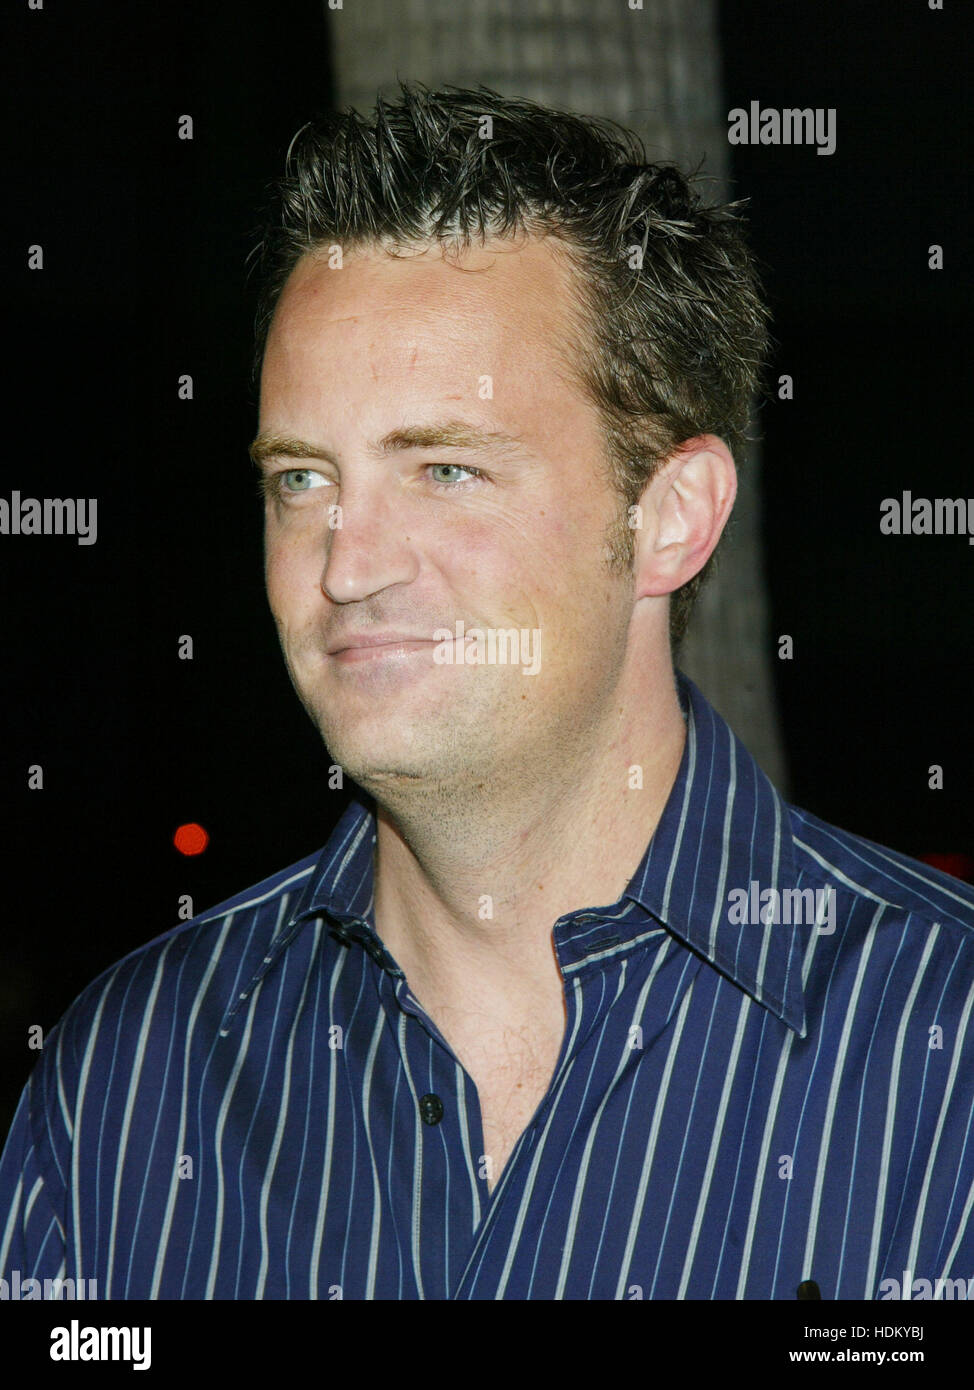 Actor Matthew Perry at the premiere of 